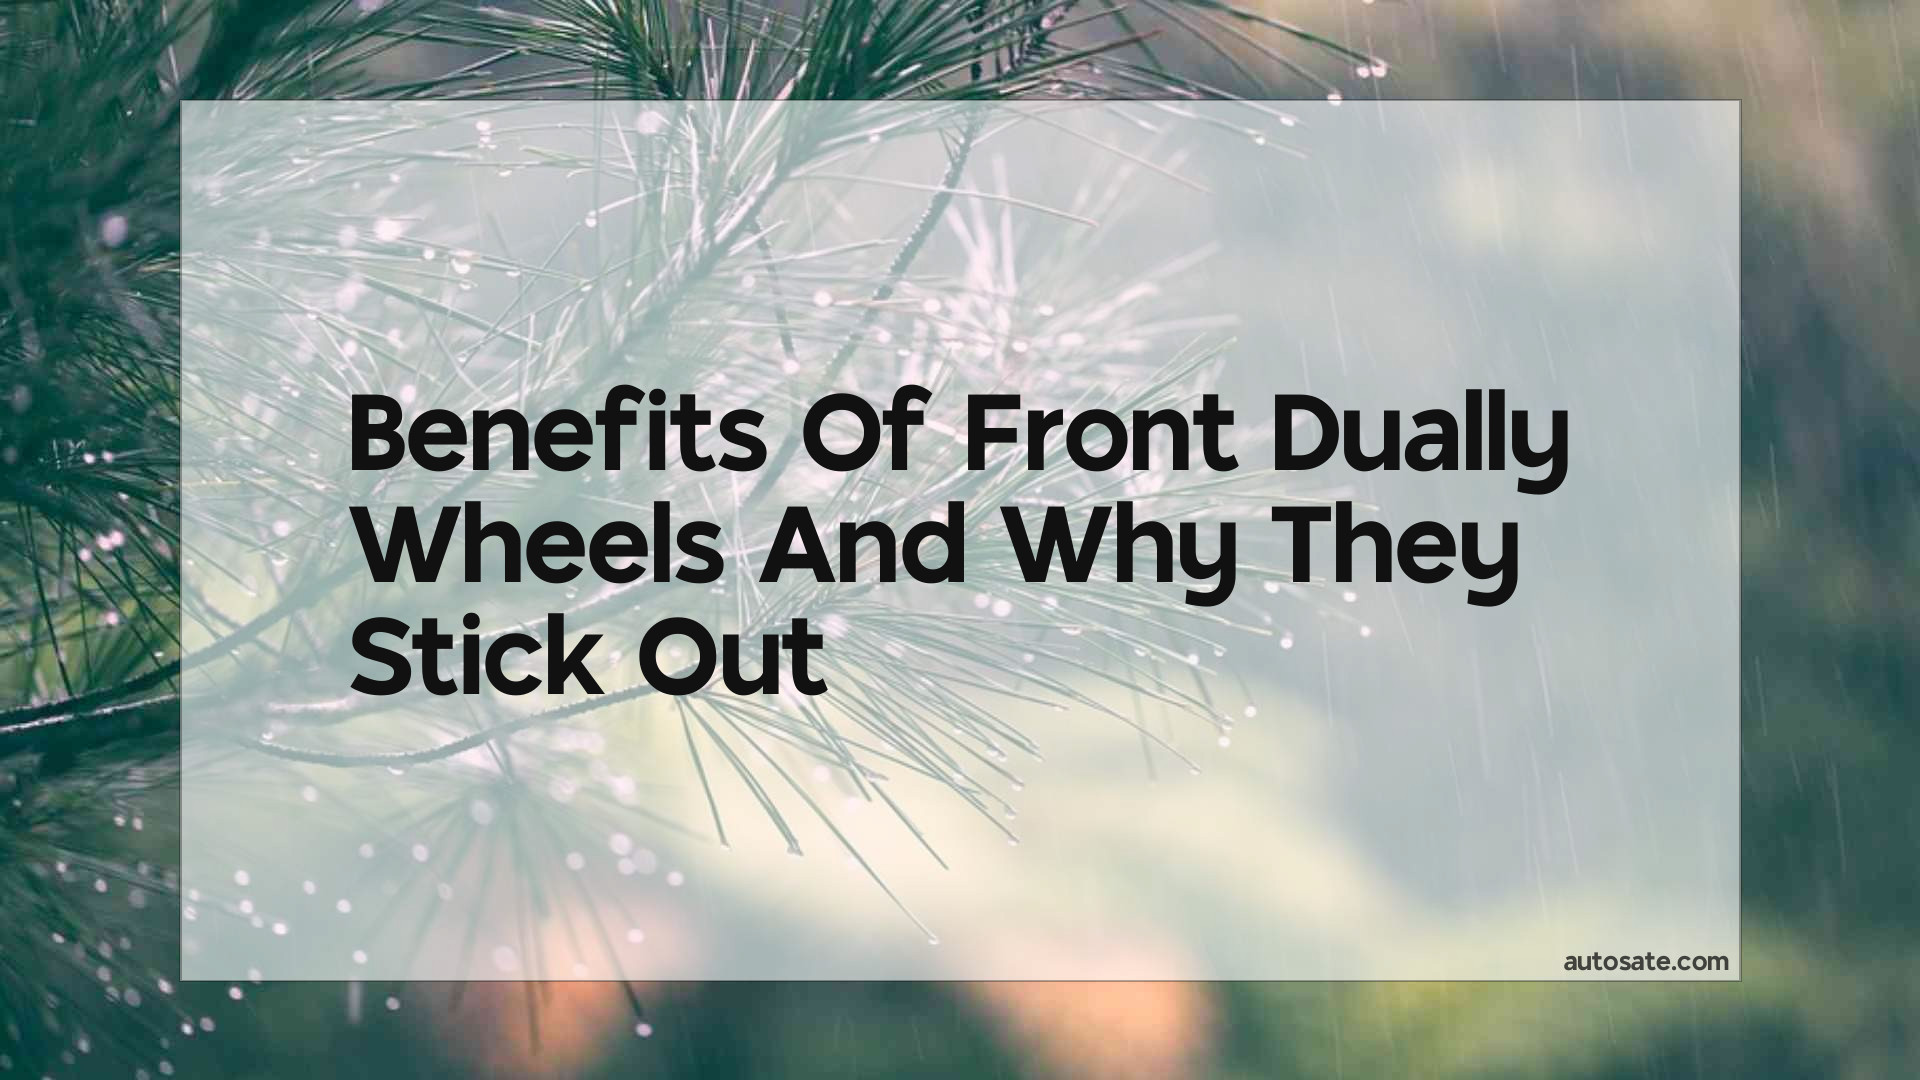 Benefits Of Front Dually Wheels And Why They Stick Out